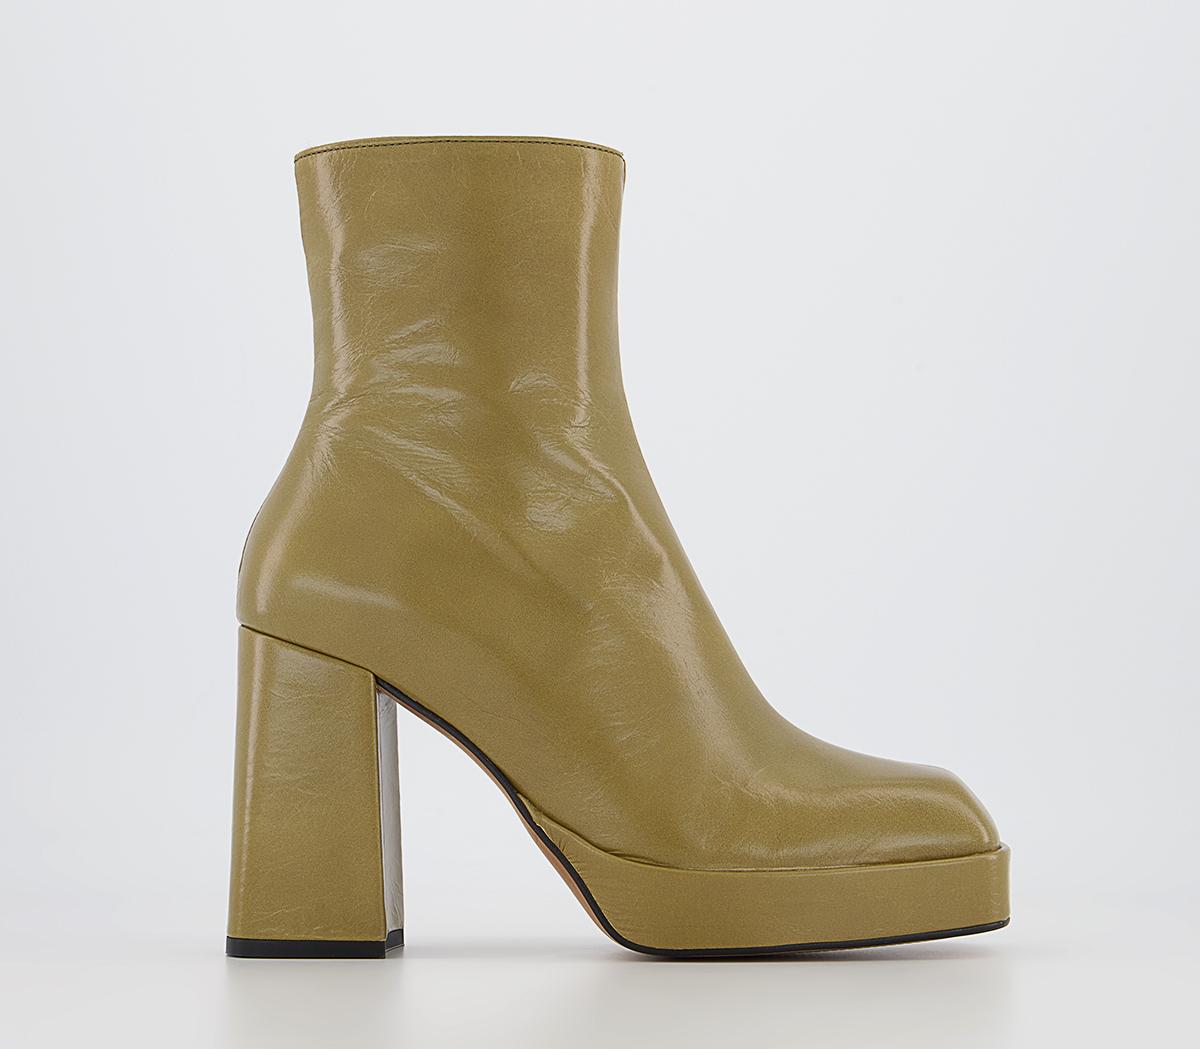 Attitude Square Toe Platform Ankle Boots Green Leather